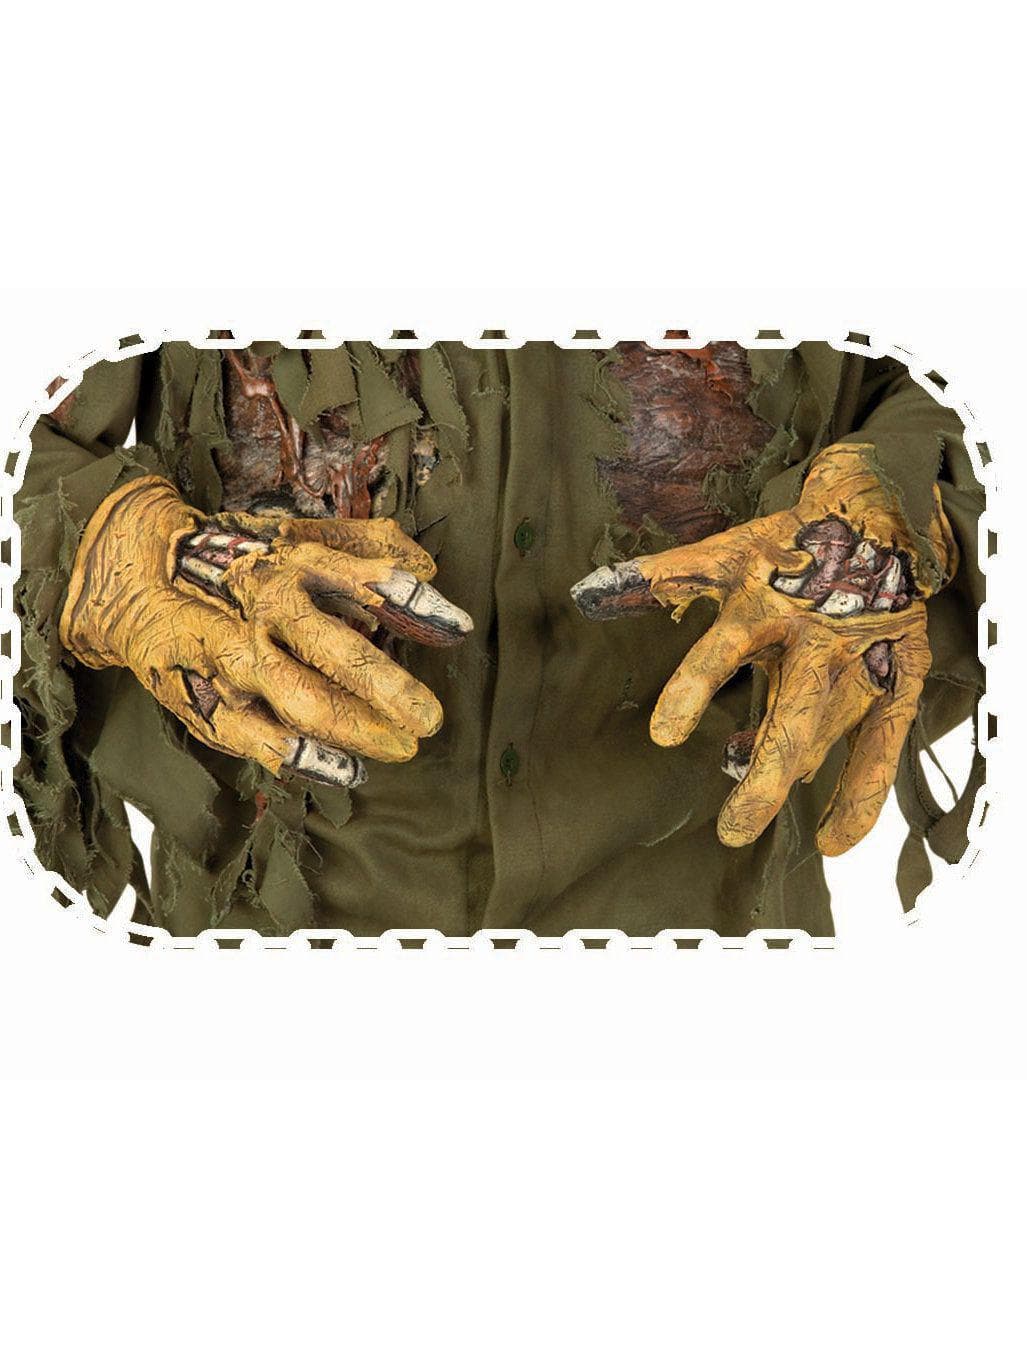 Adult Friday The 13th Jason Voorhees Latex Hands - Deluxe - costumes.com